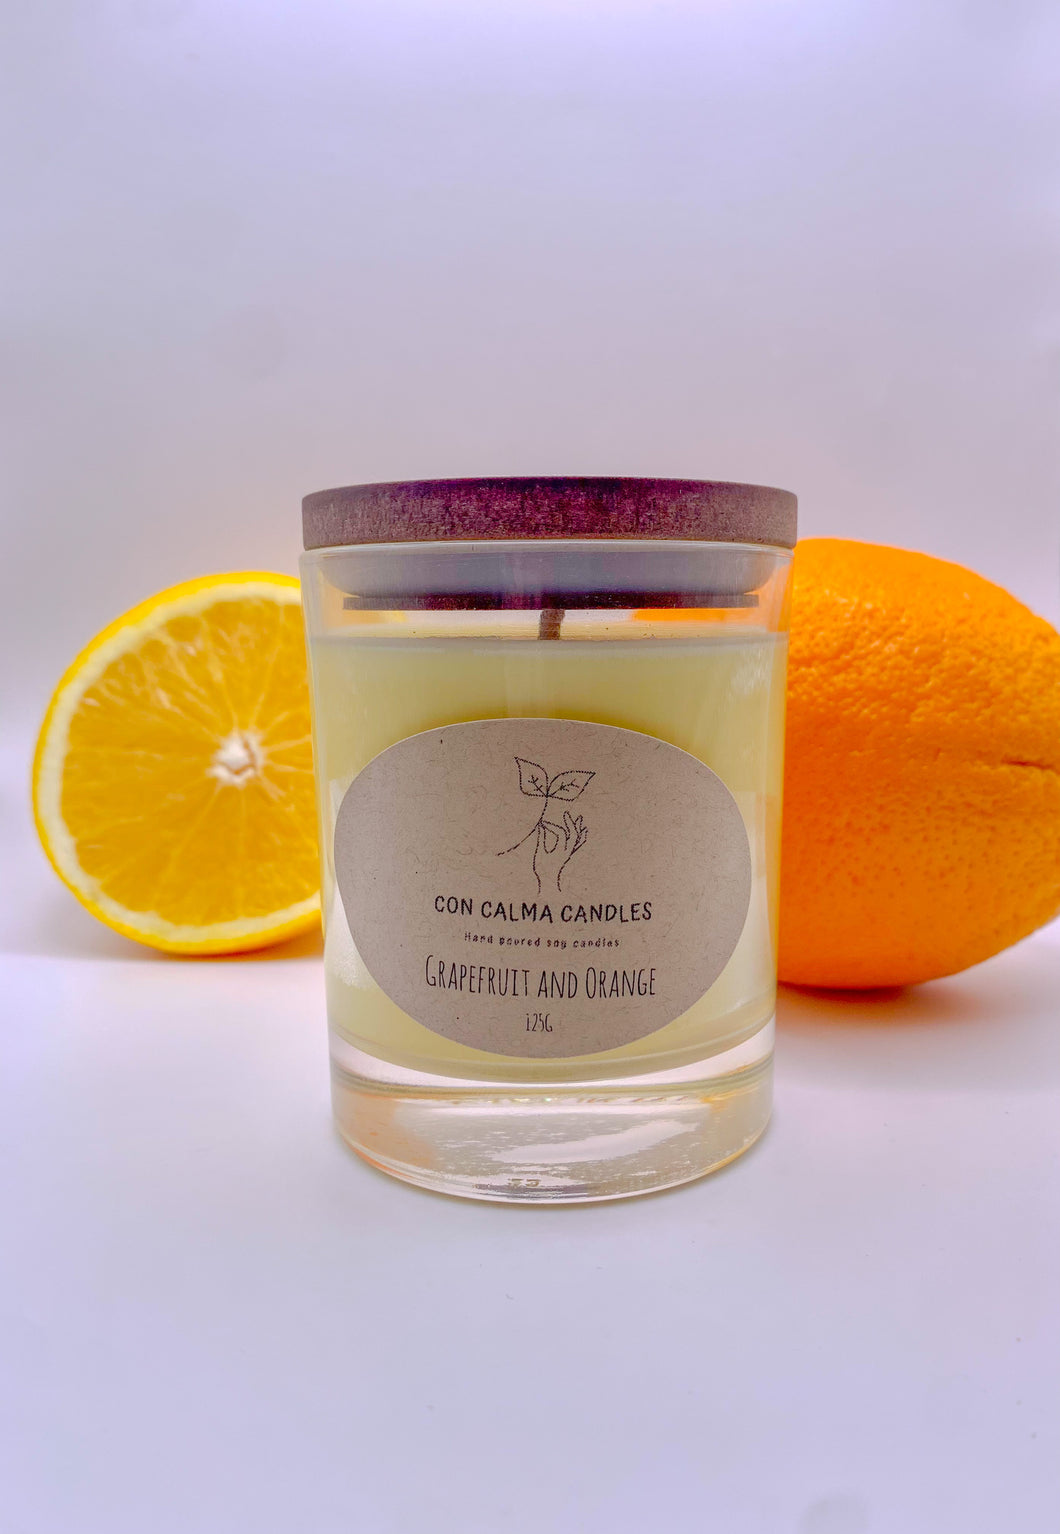 Grapefruit and Orange soy wax candle